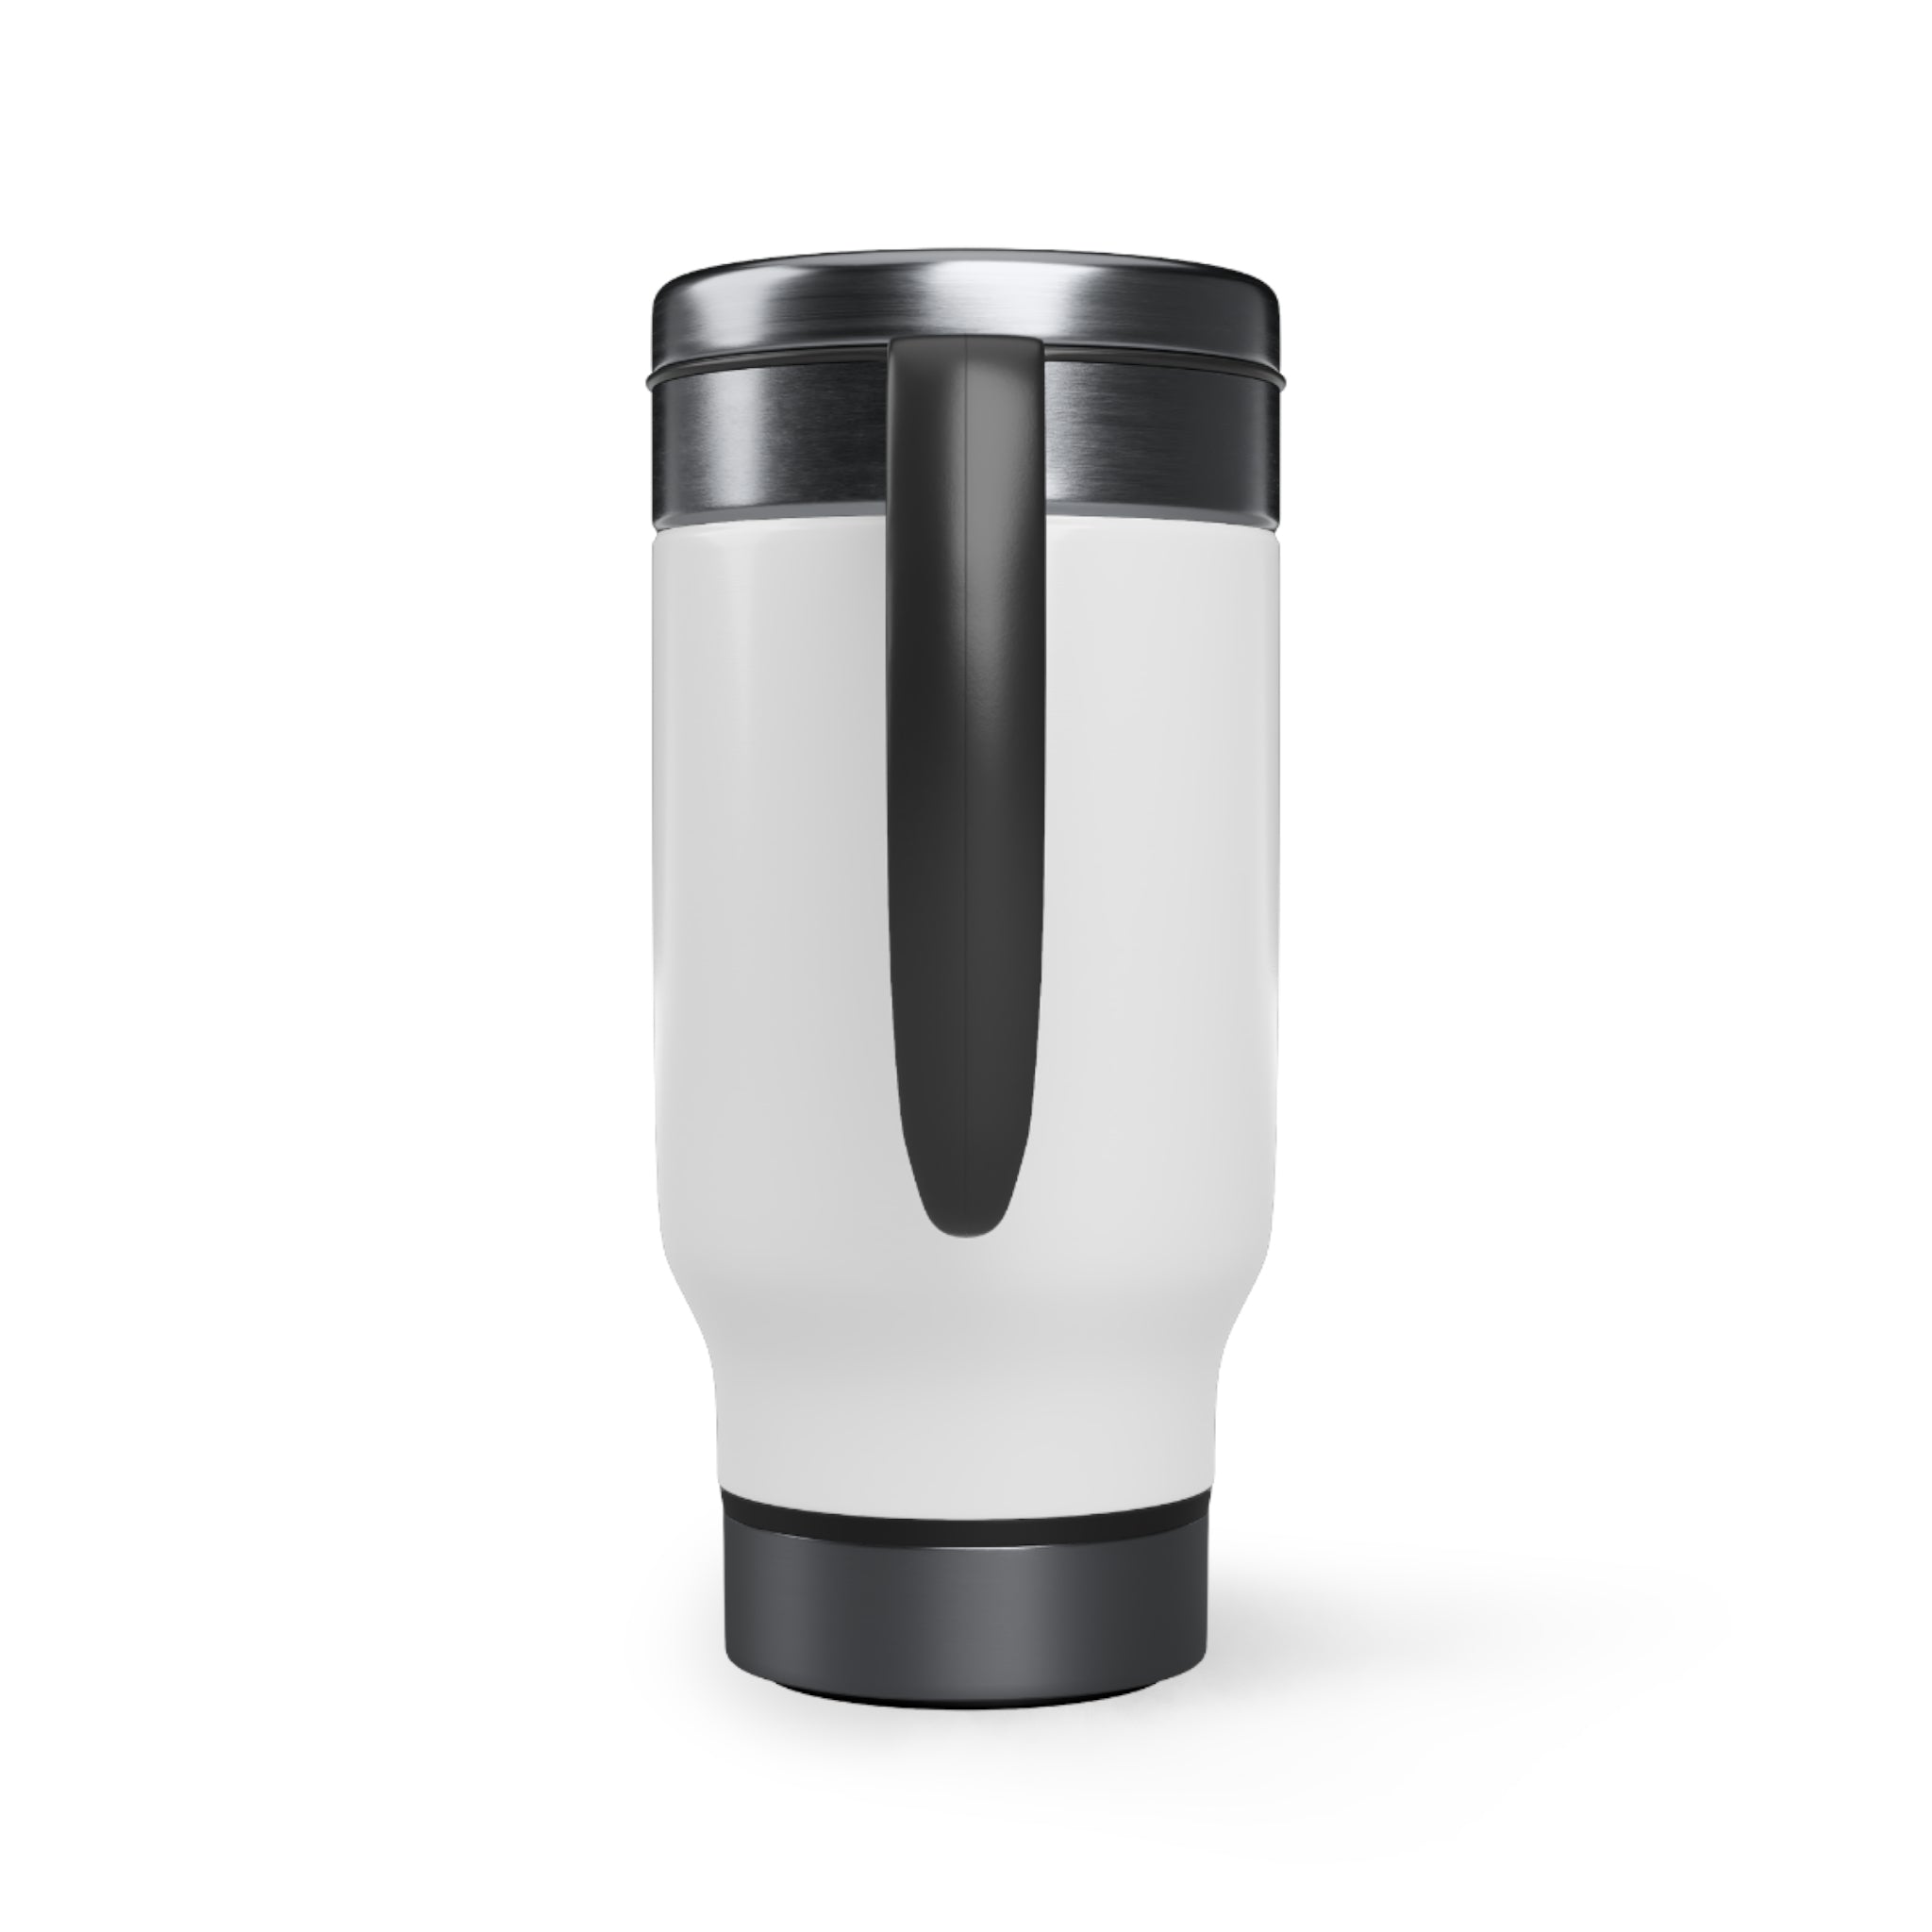 Germany Stainless Steel Travel Mug with Handle, 14oz